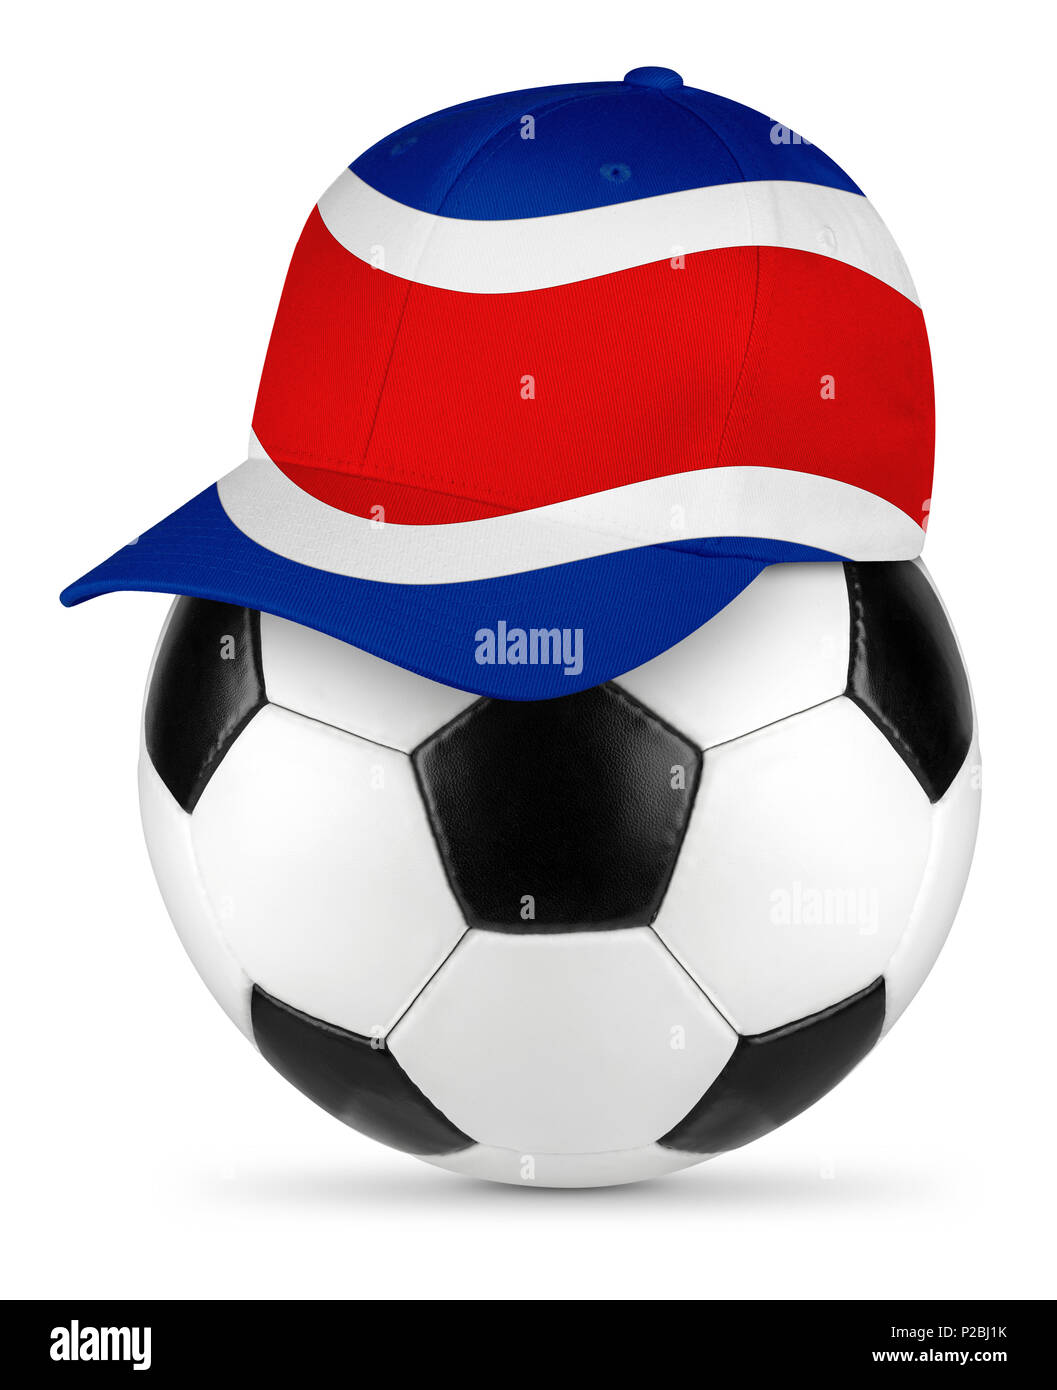 Classic black white leather soccer ball costa rica flag baseball fan cap isolated background sport football concept Stock Photo